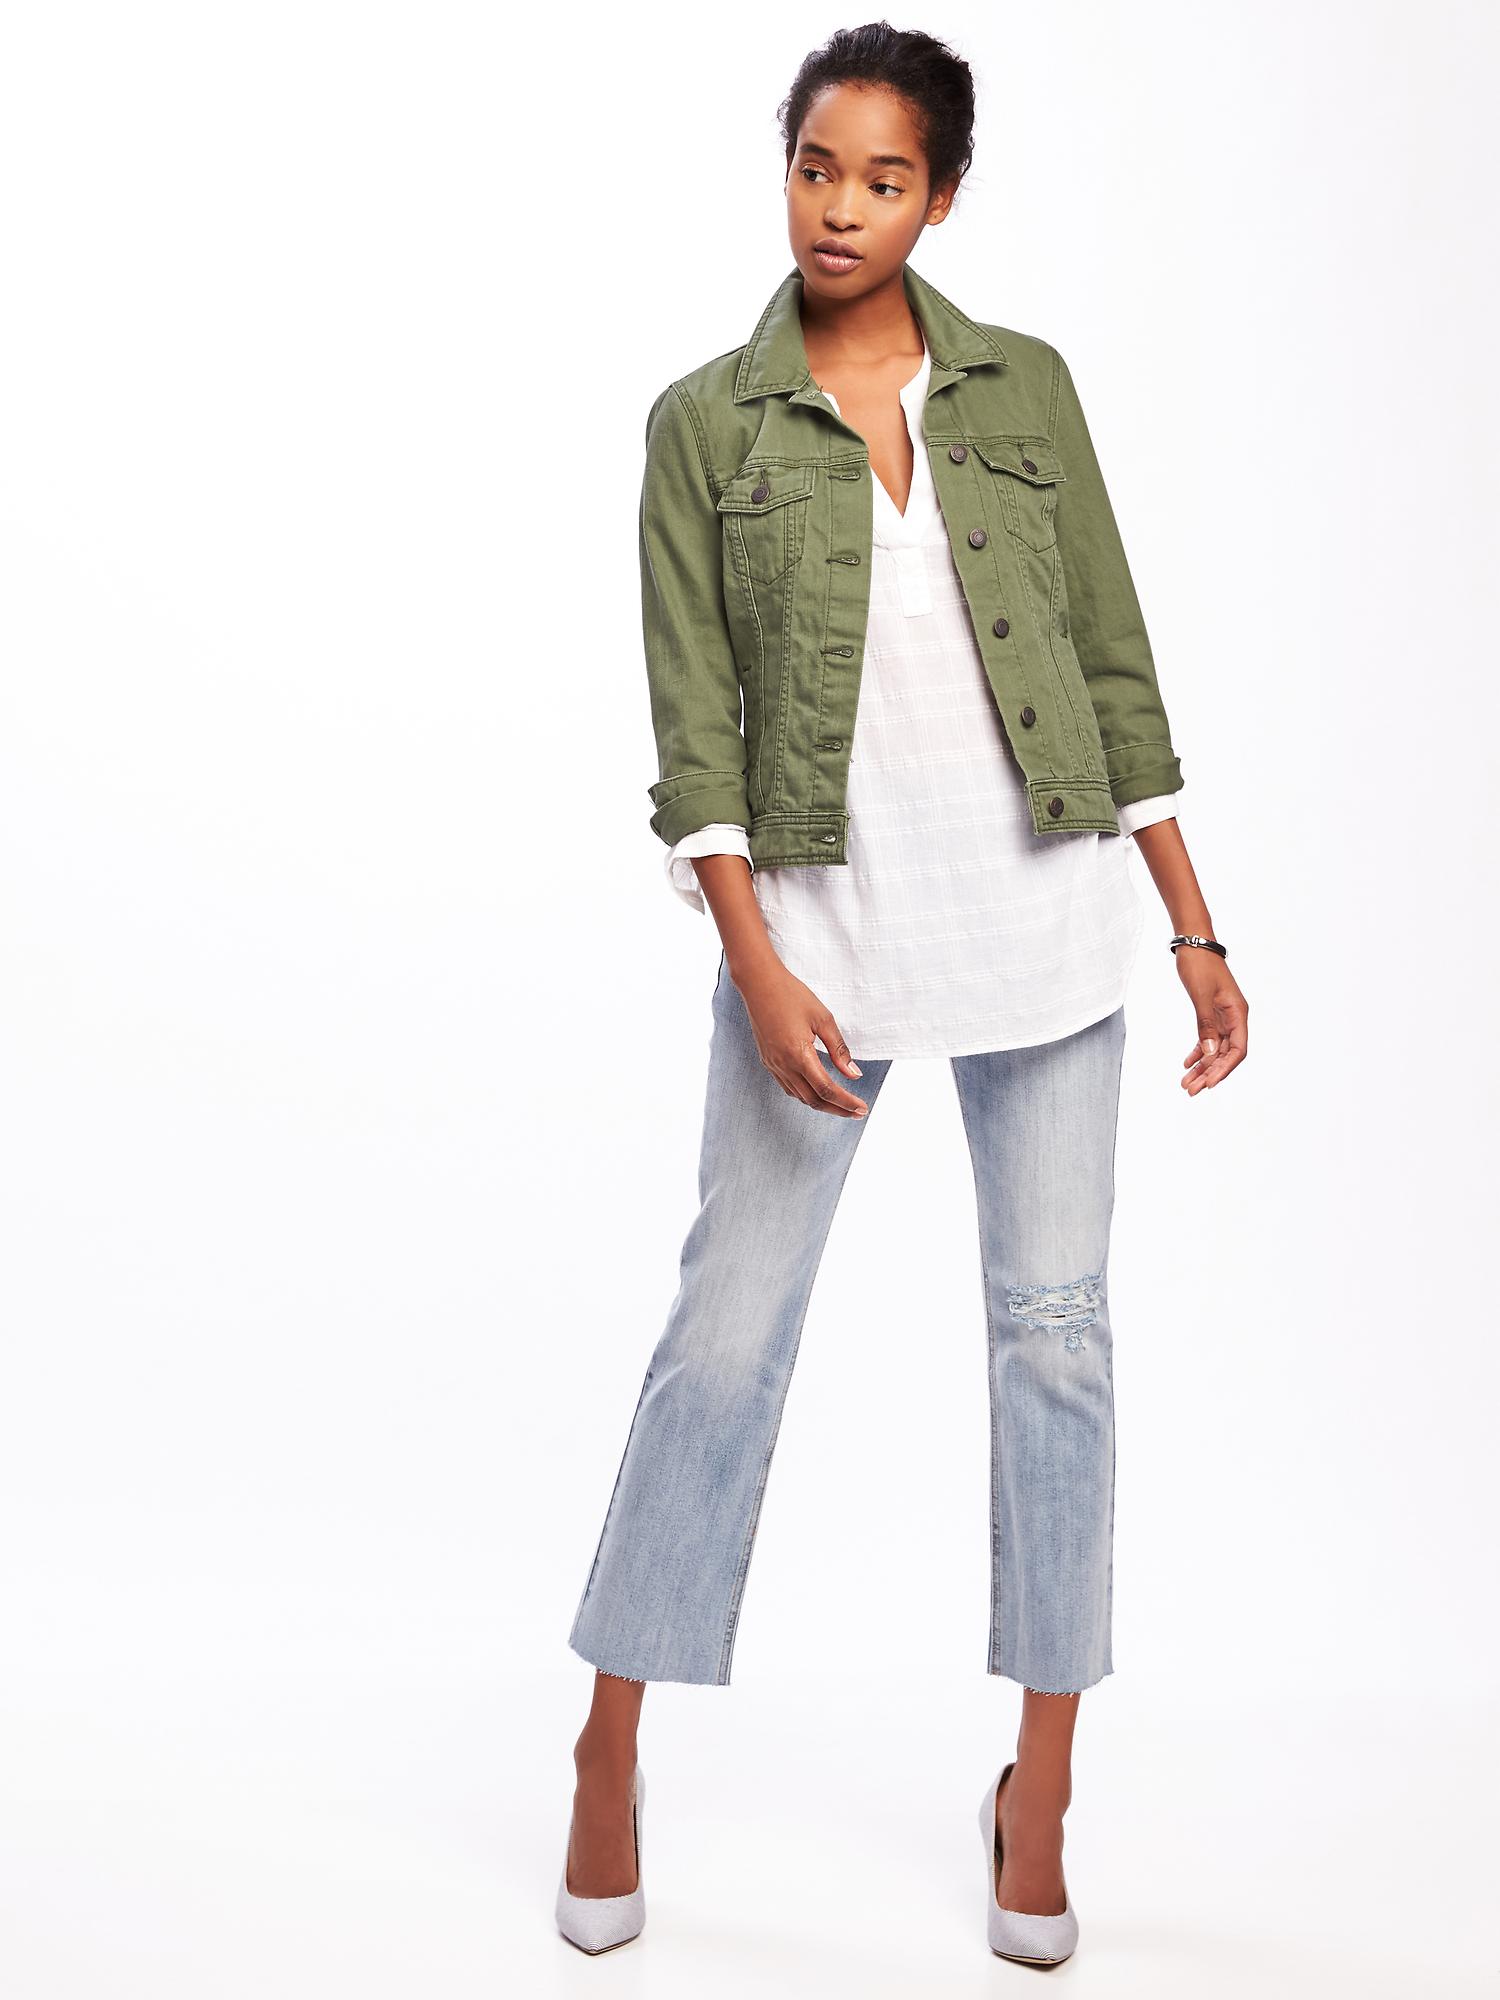 DB STACK JEANS & JACKET SETS - OLIVE – Daily Bread